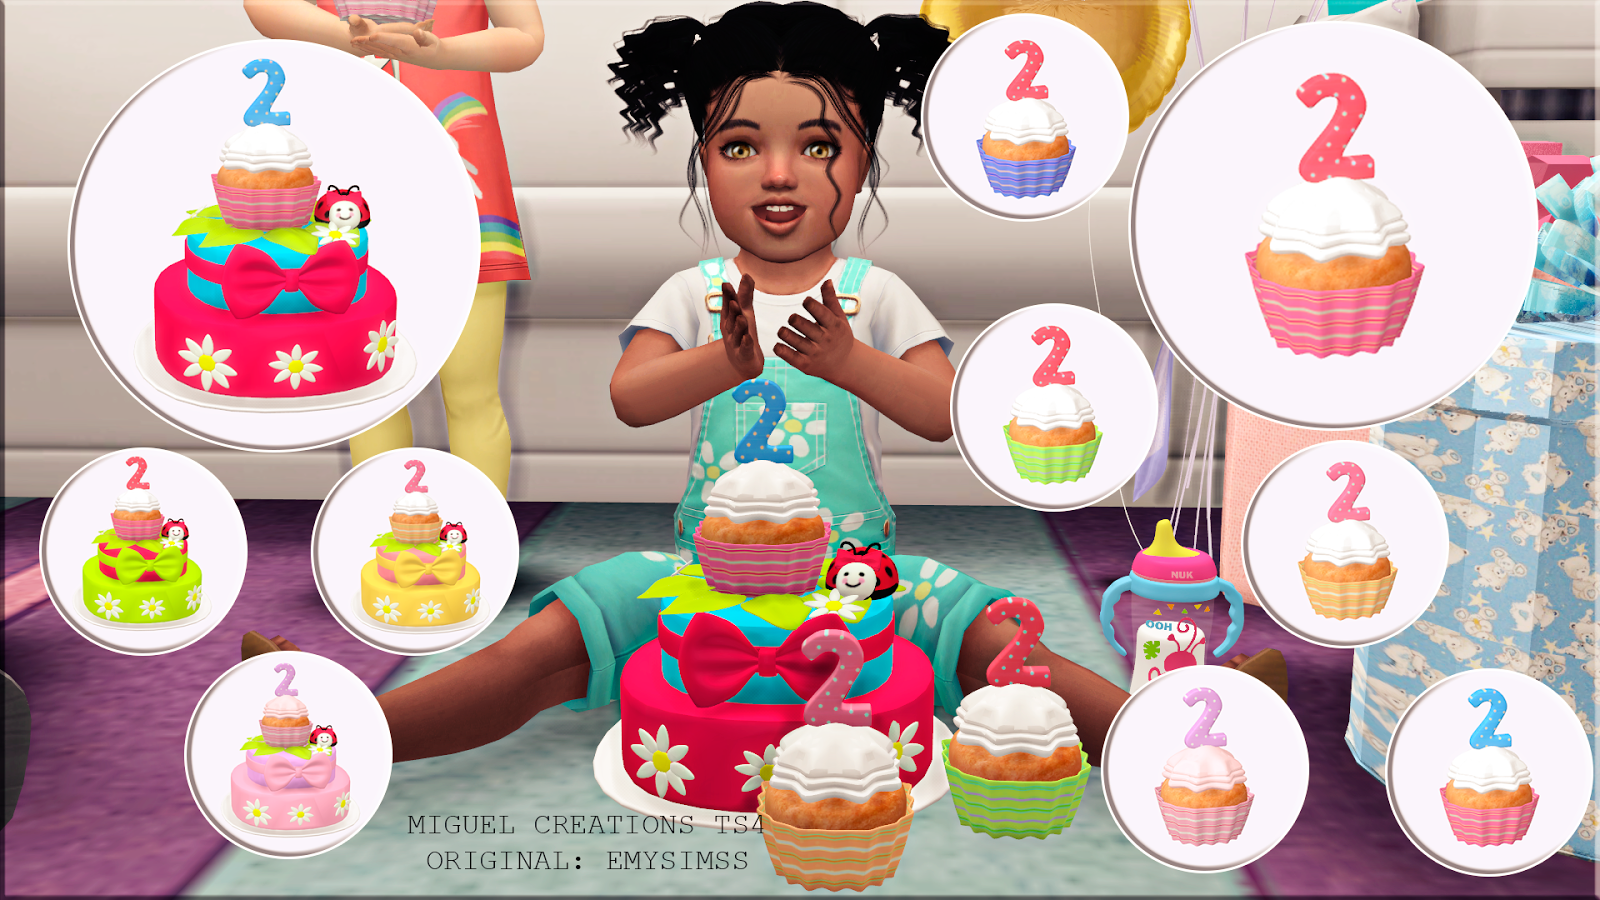 Miguel Creations TS4 Girl s Birthday 